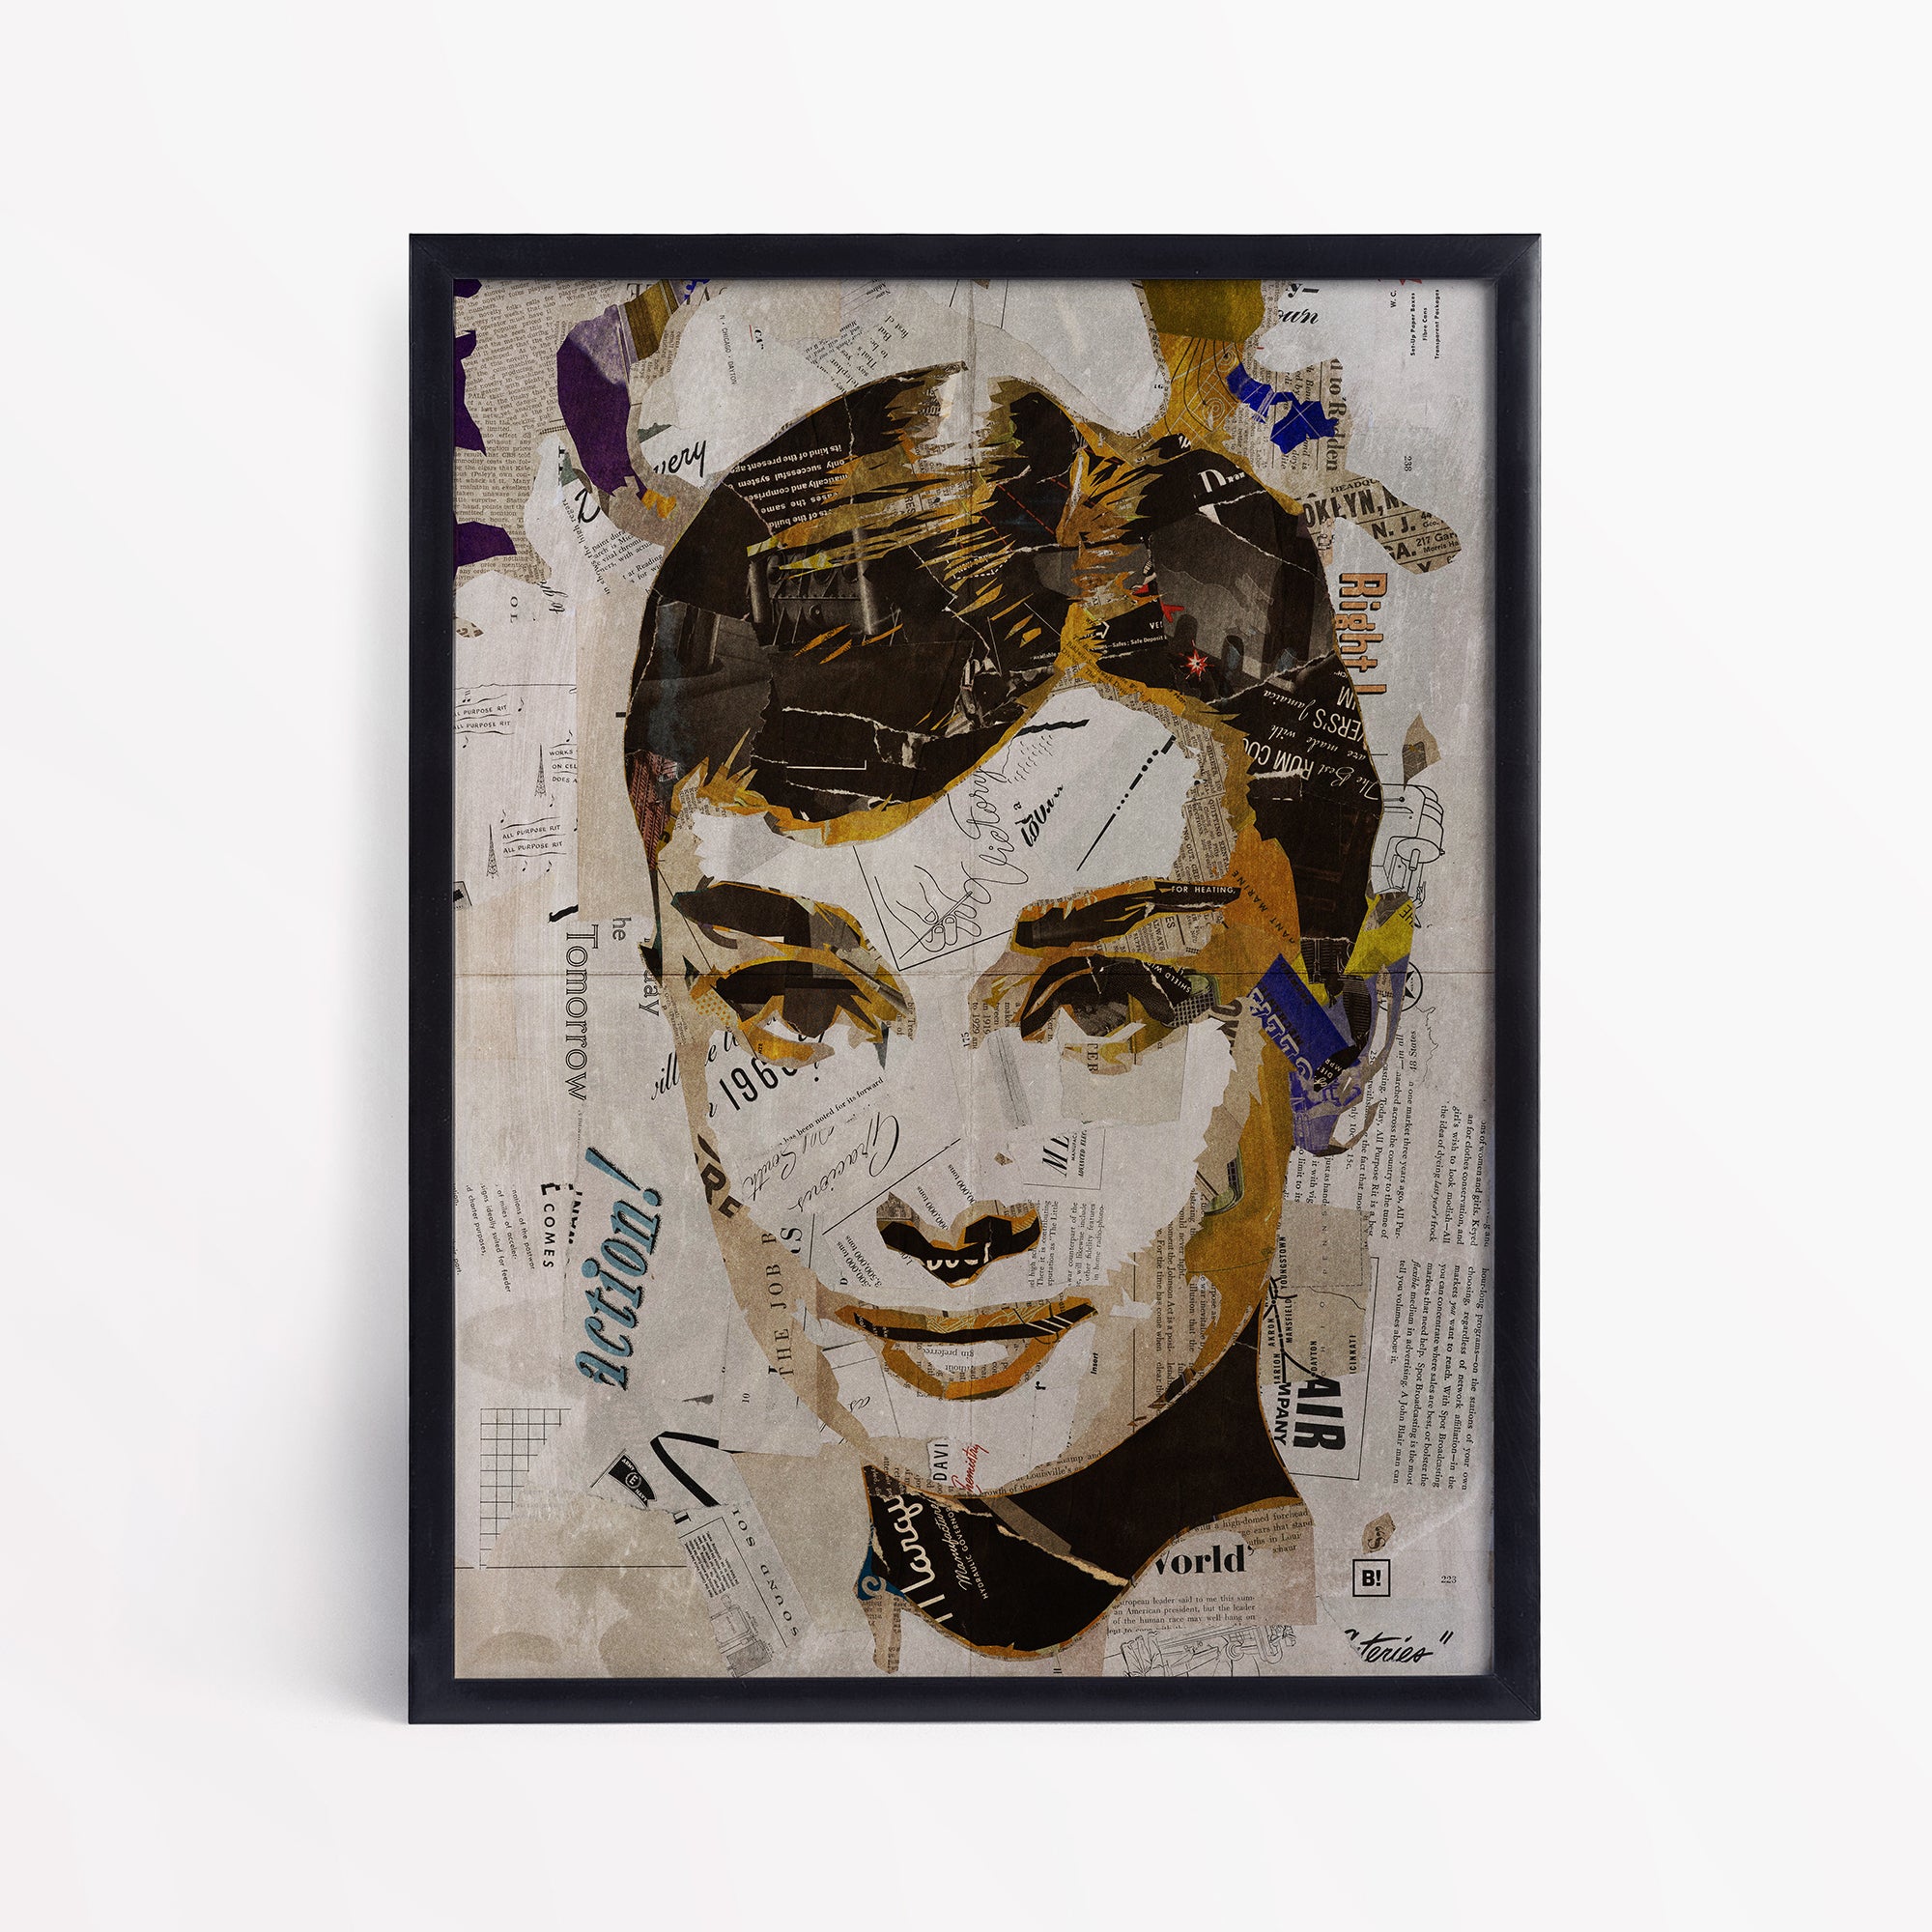 Be inspired by our iconic collage portrait art print of Audrey Hepburn. This artwork has been printed using the giclée process on archival acid-free paper and is presented in a sleek black frame, showcasing its timeless beauty in every detail.